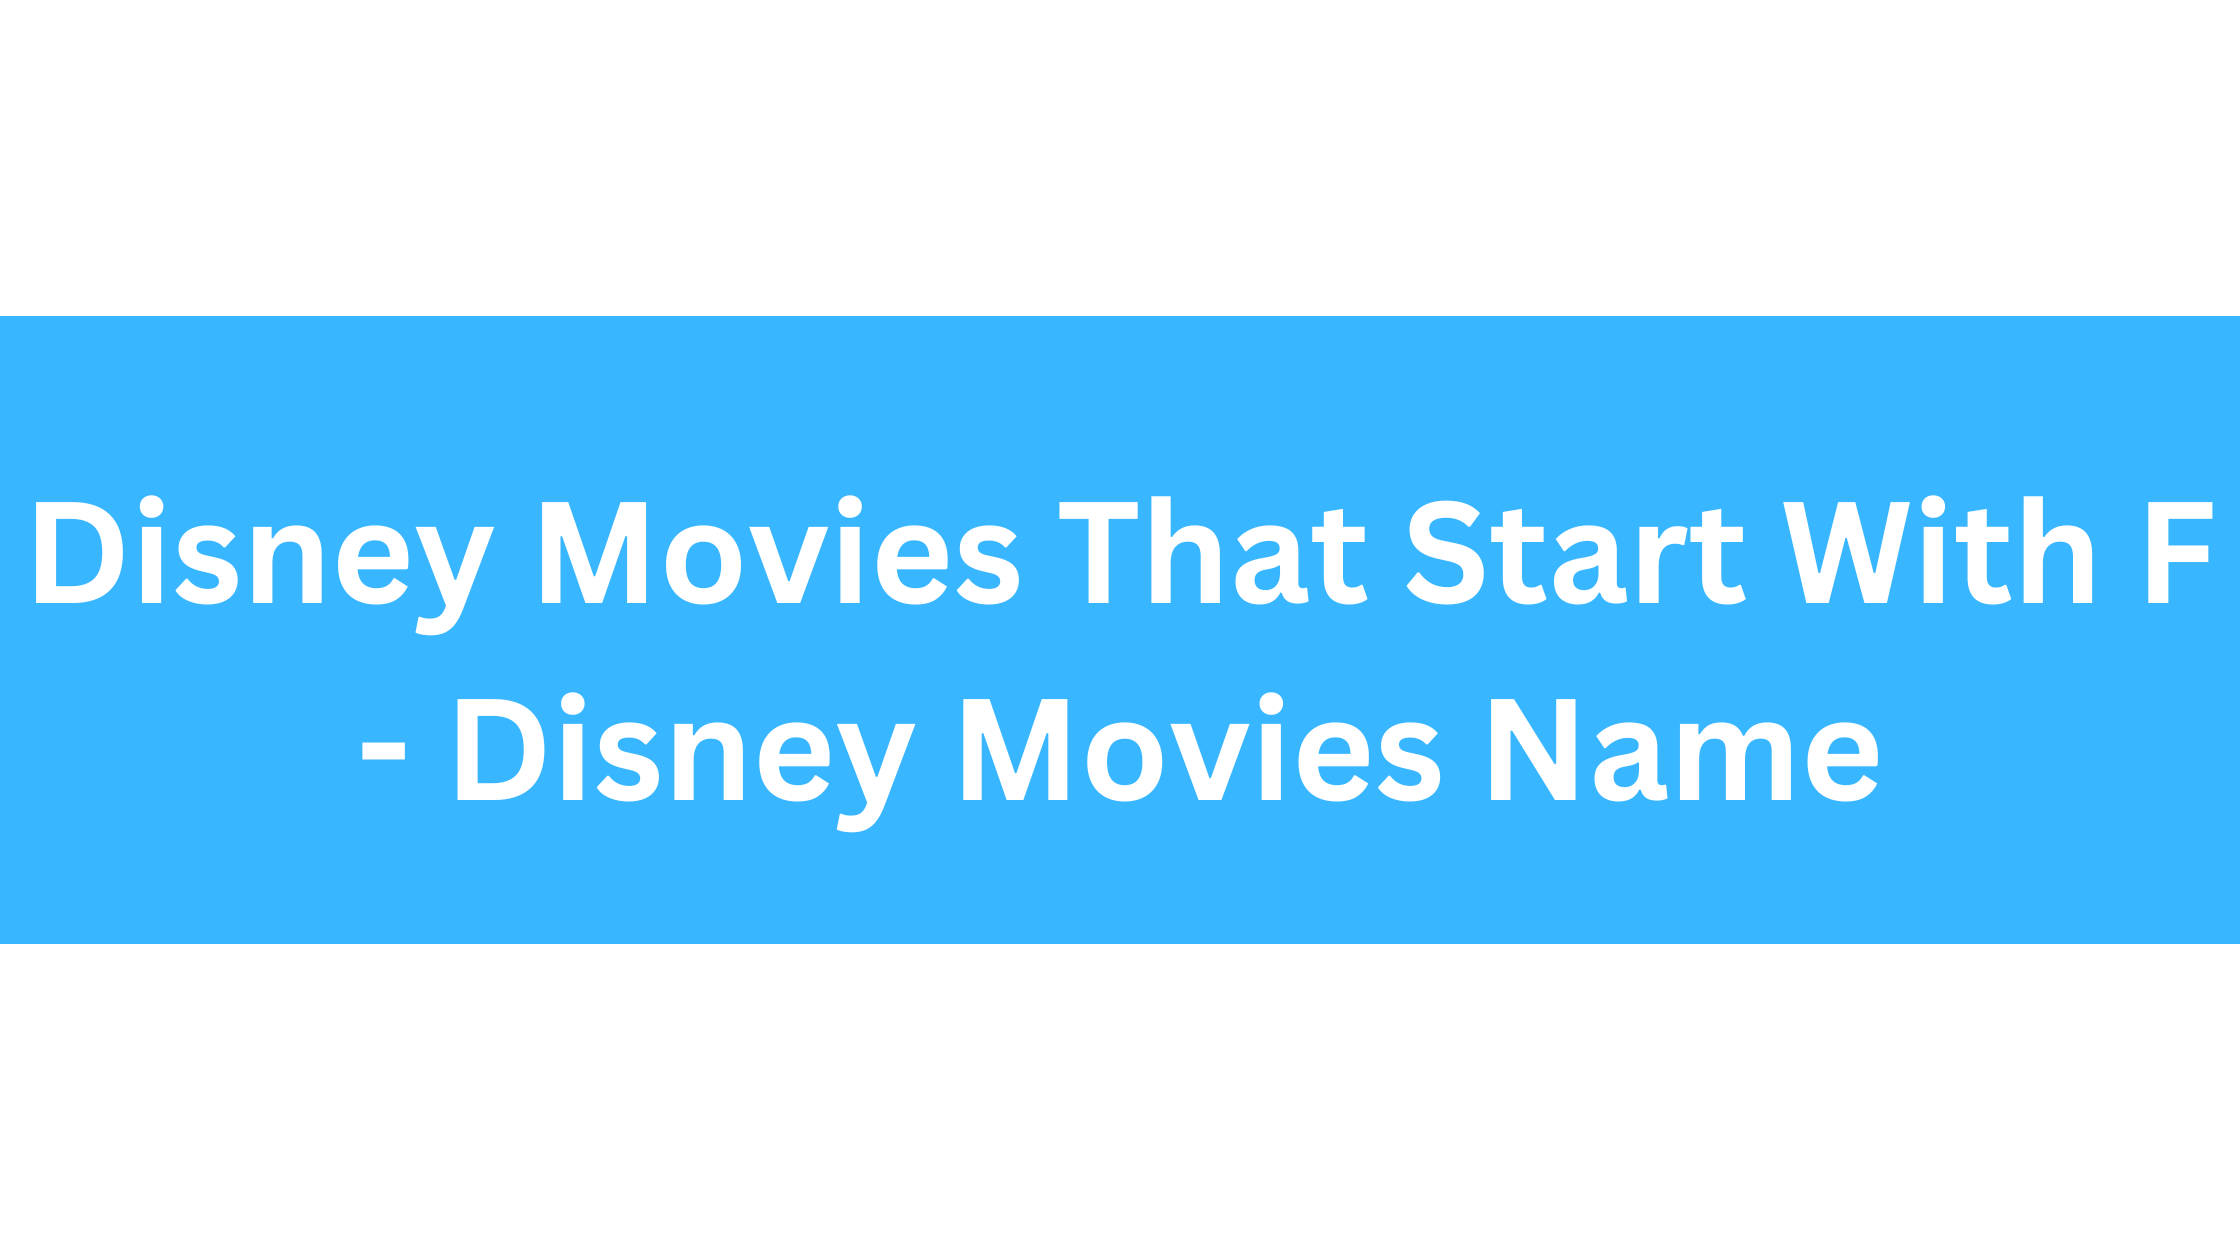 Disney Movies That Start With F